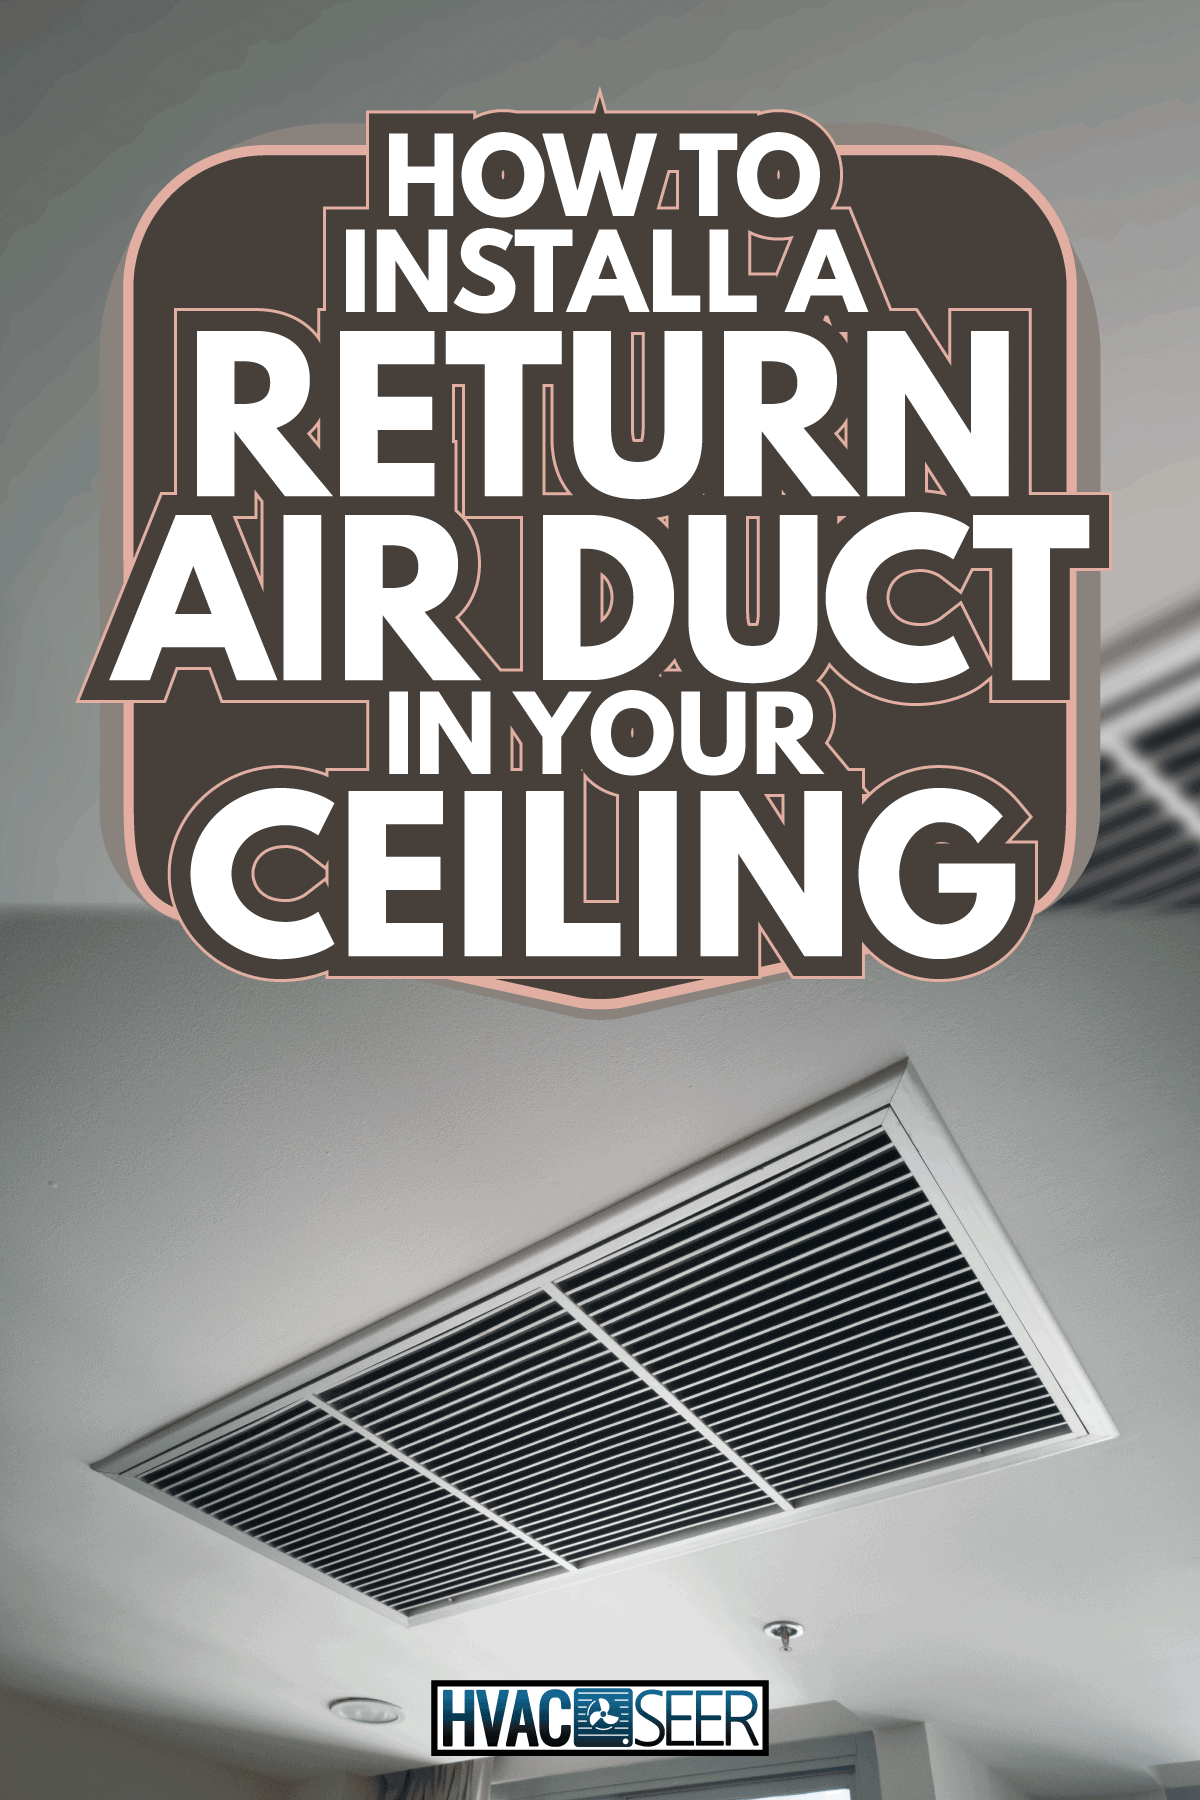 Air condition in room, ceiling vent. How To Install a Return Air Duct In Your Ceiling